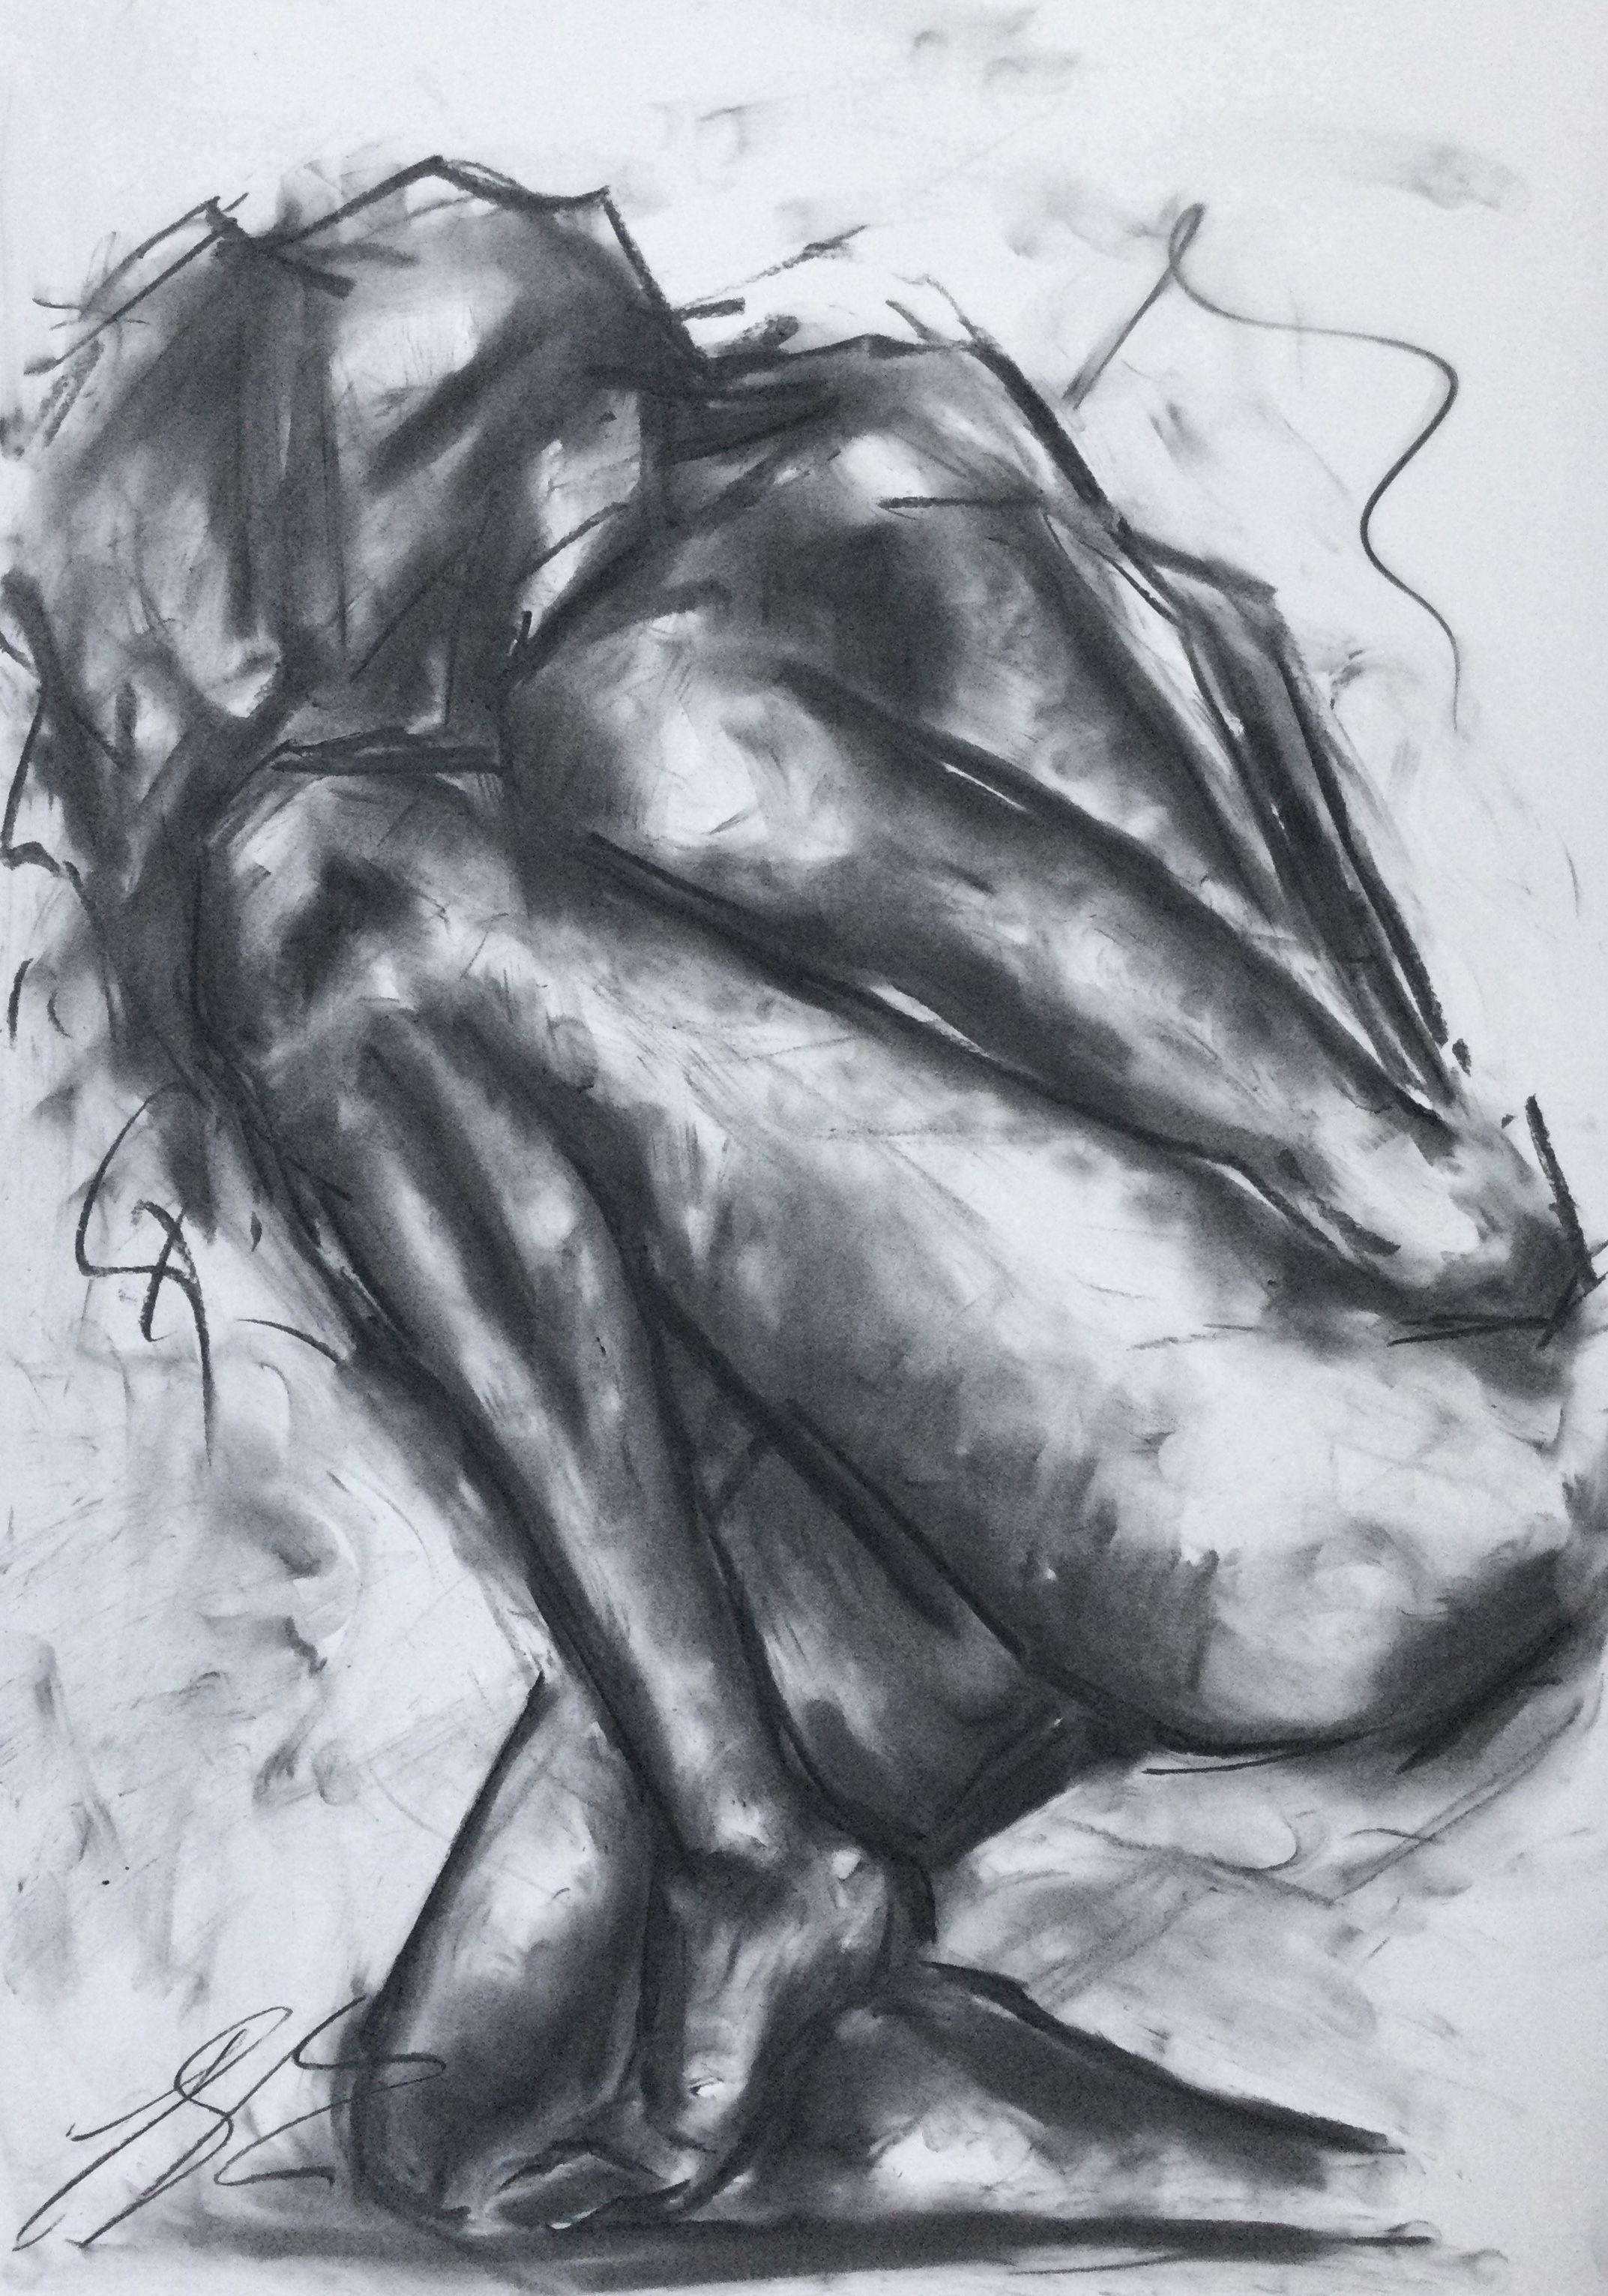 Once Again, Drawing, Charcoal on Paper - Art by James Shipton